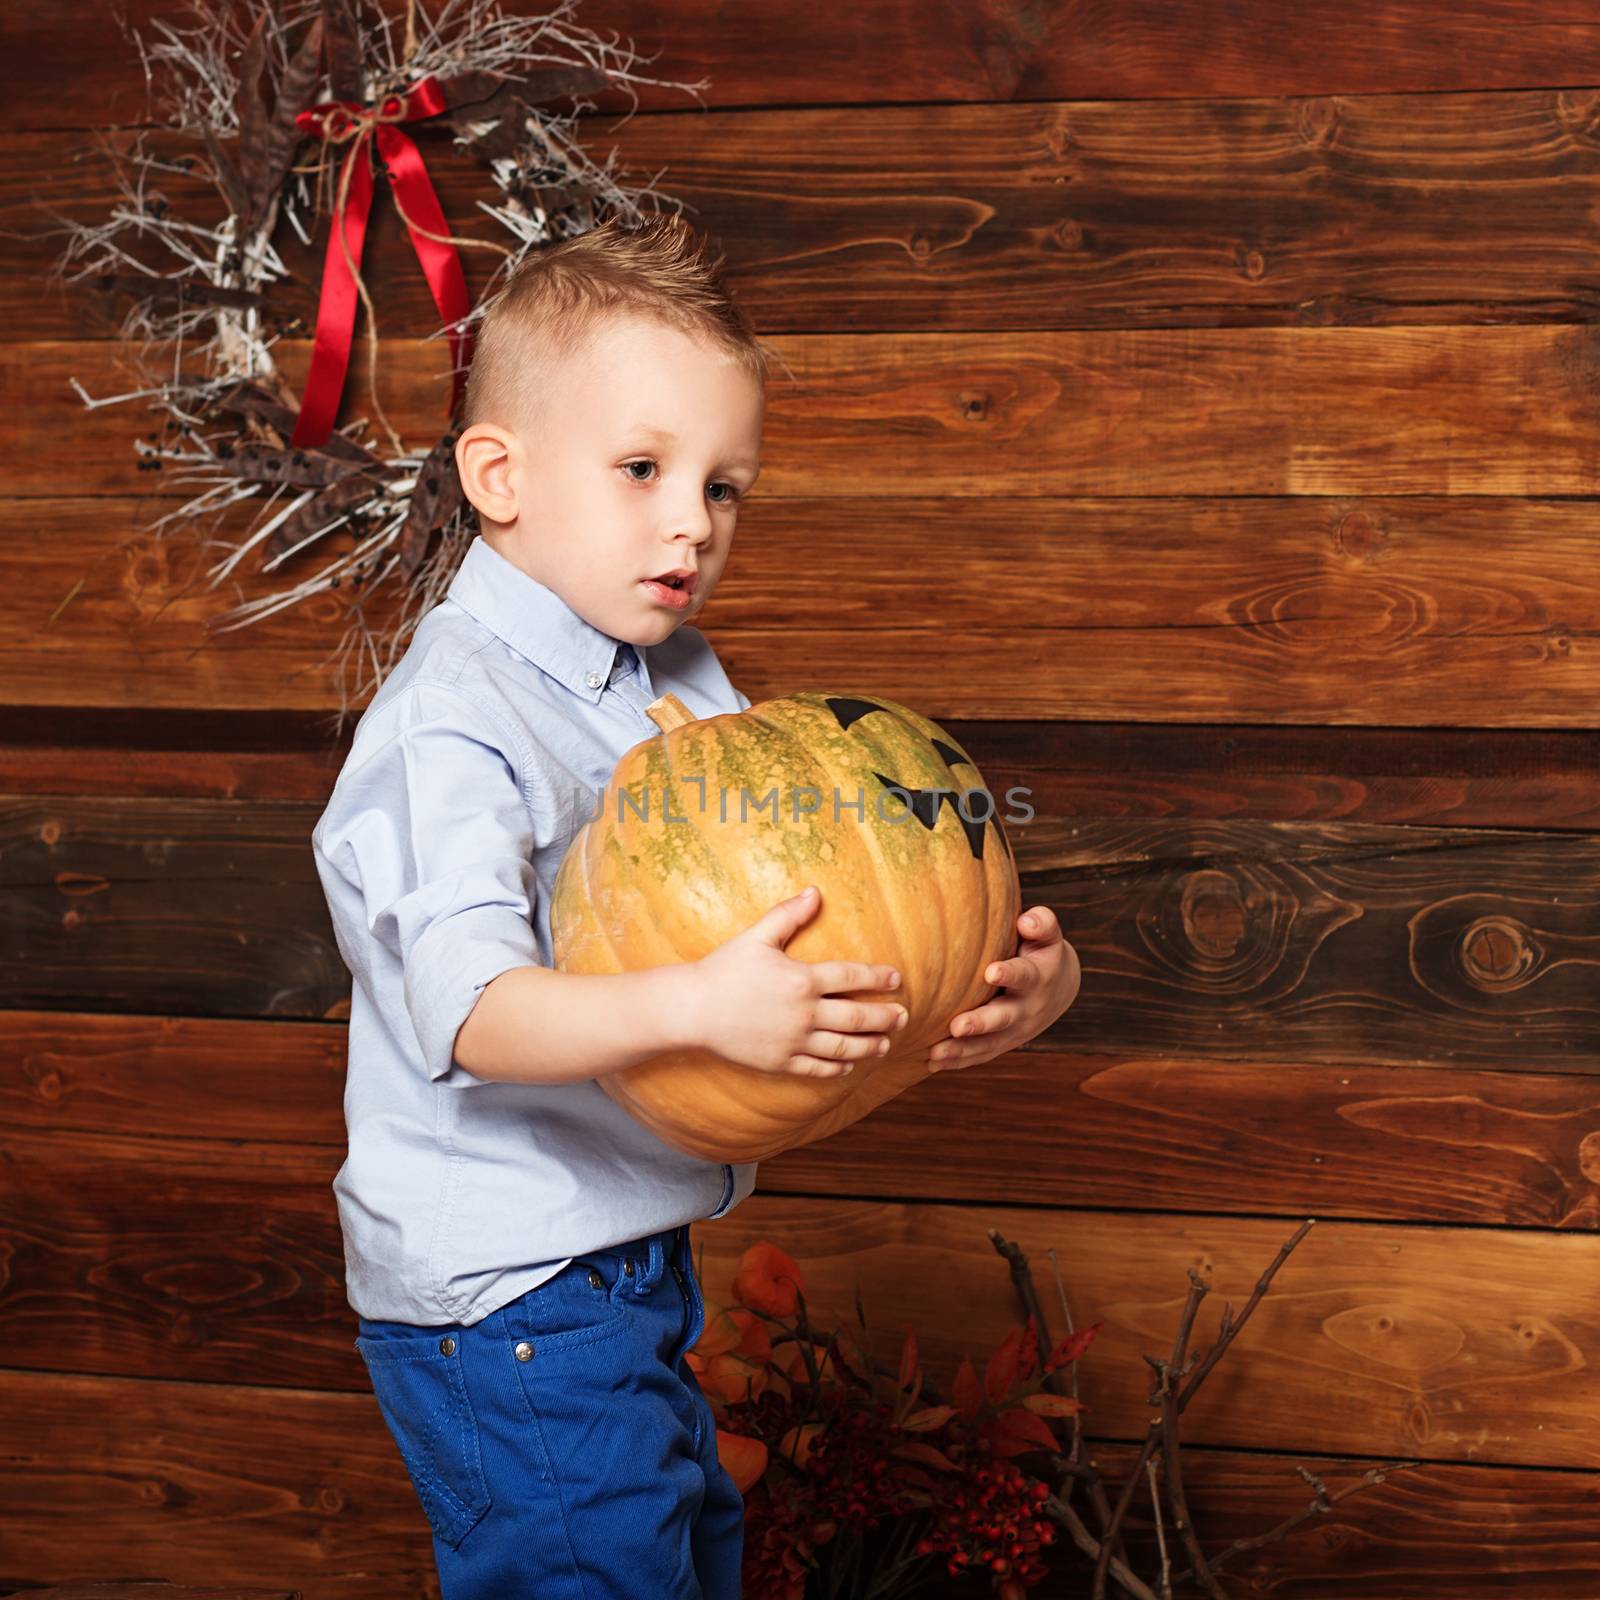 Cute Little Boy having fun in Halloween decorations. Halloween party with child holding painted heavy pumpkin